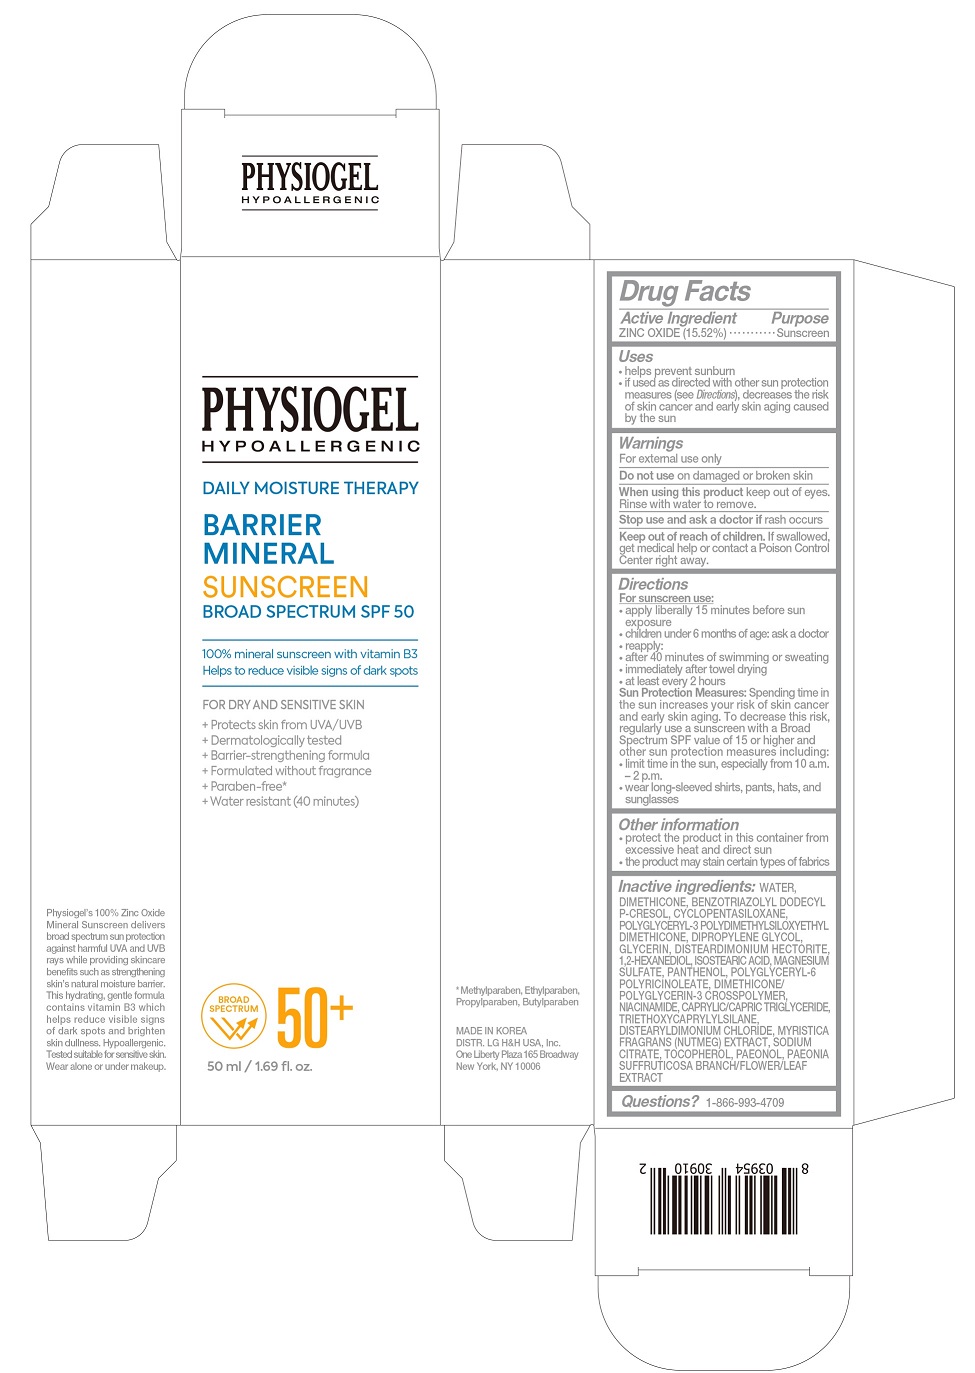 Physiogel_DMT_Barrier_Mineral_SPF50_OC